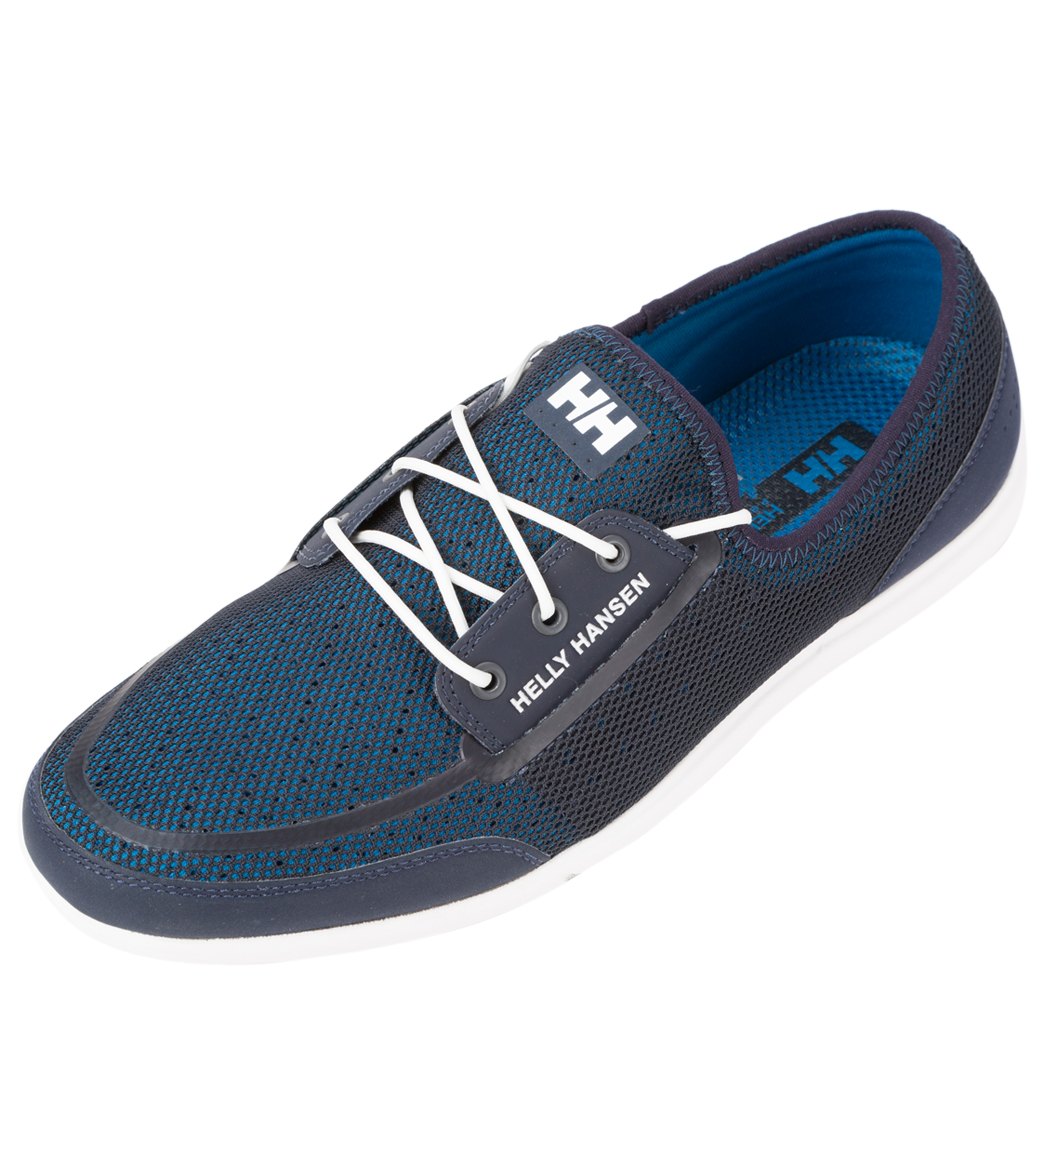 Helly Hansen Men's Trysail Water Shoes - Prussian Blue/Navy/Off White/Light Grey 7 - Swimoutlet.com